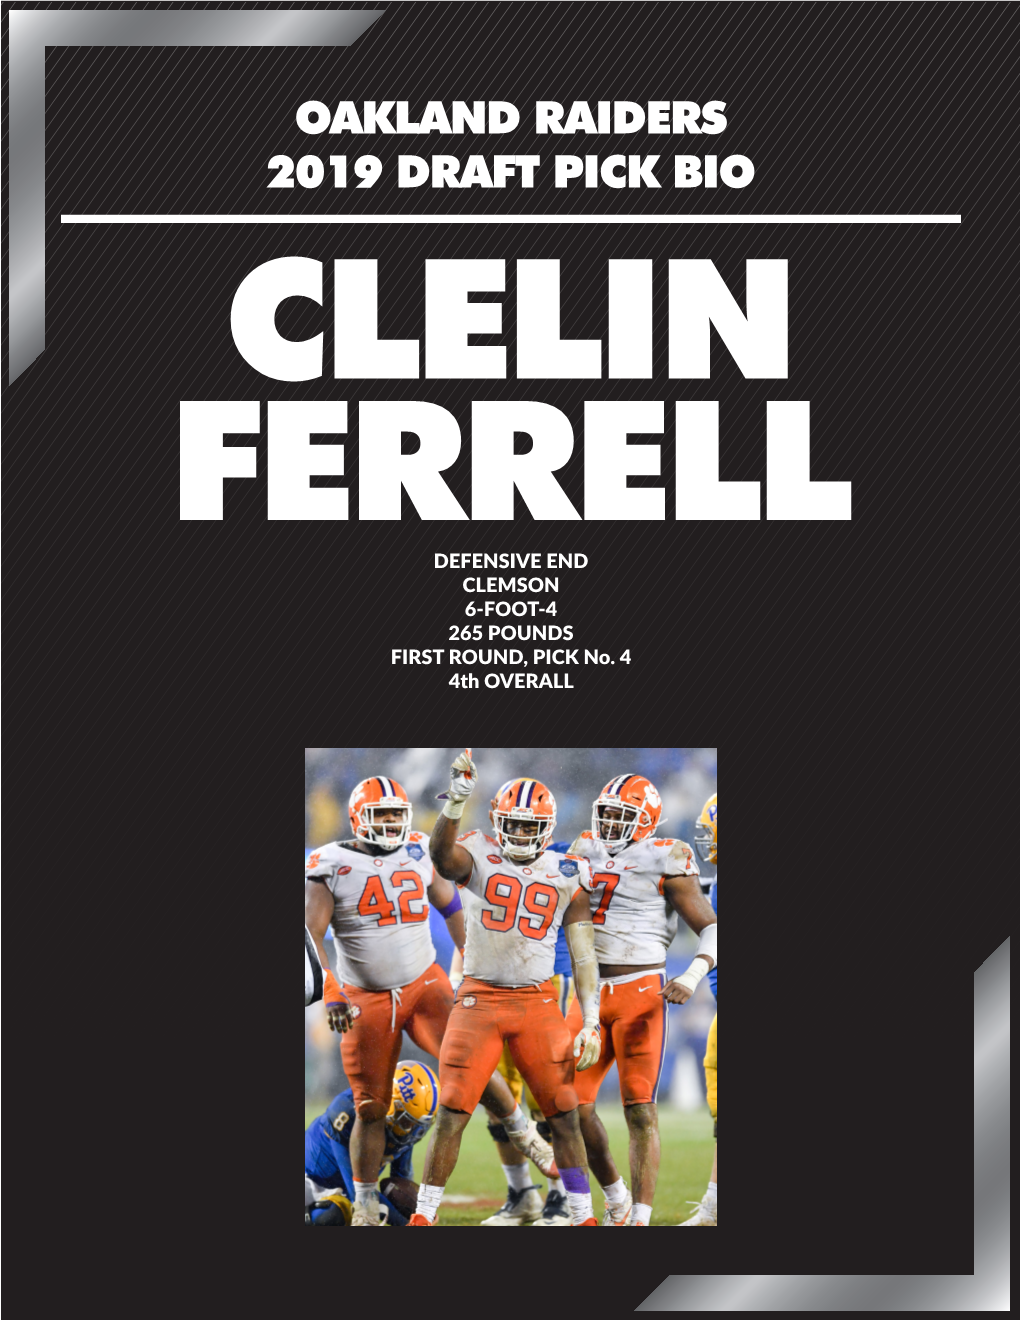 OAKLAND RAIDERS 2019 DRAFT PICK BIO CLELIN FERRELL DEFENSIVE END CLEMSON 6-FOOT-4 265 POUNDS FIRST ROUND, PICK No